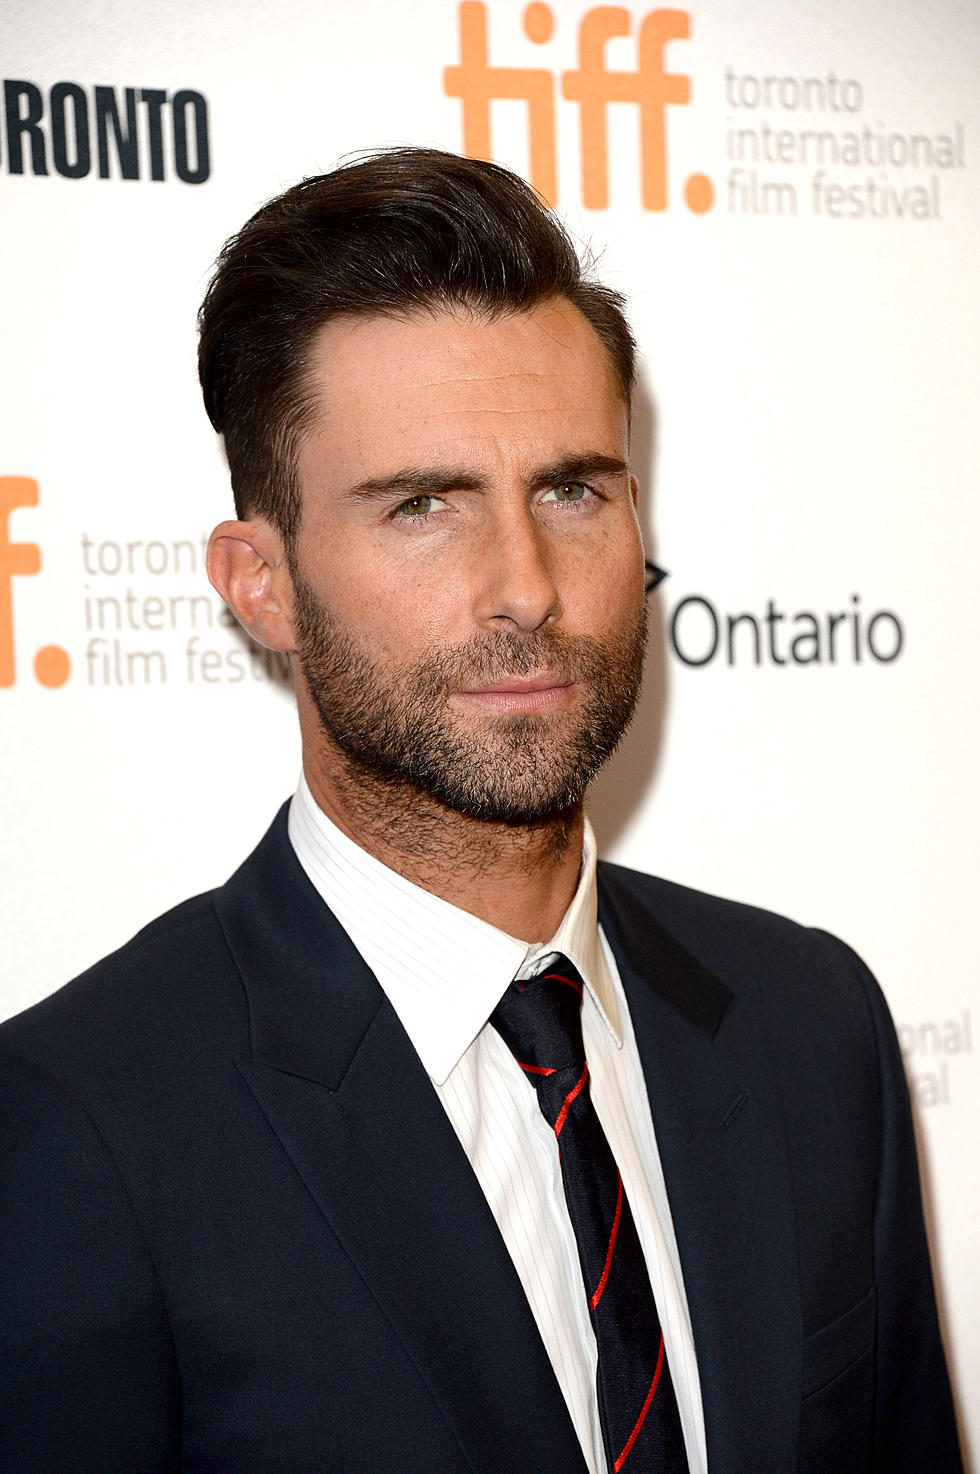 People Magazine Names Adam Levine ‘Sexiest Man Alive’ – Do You Agree?